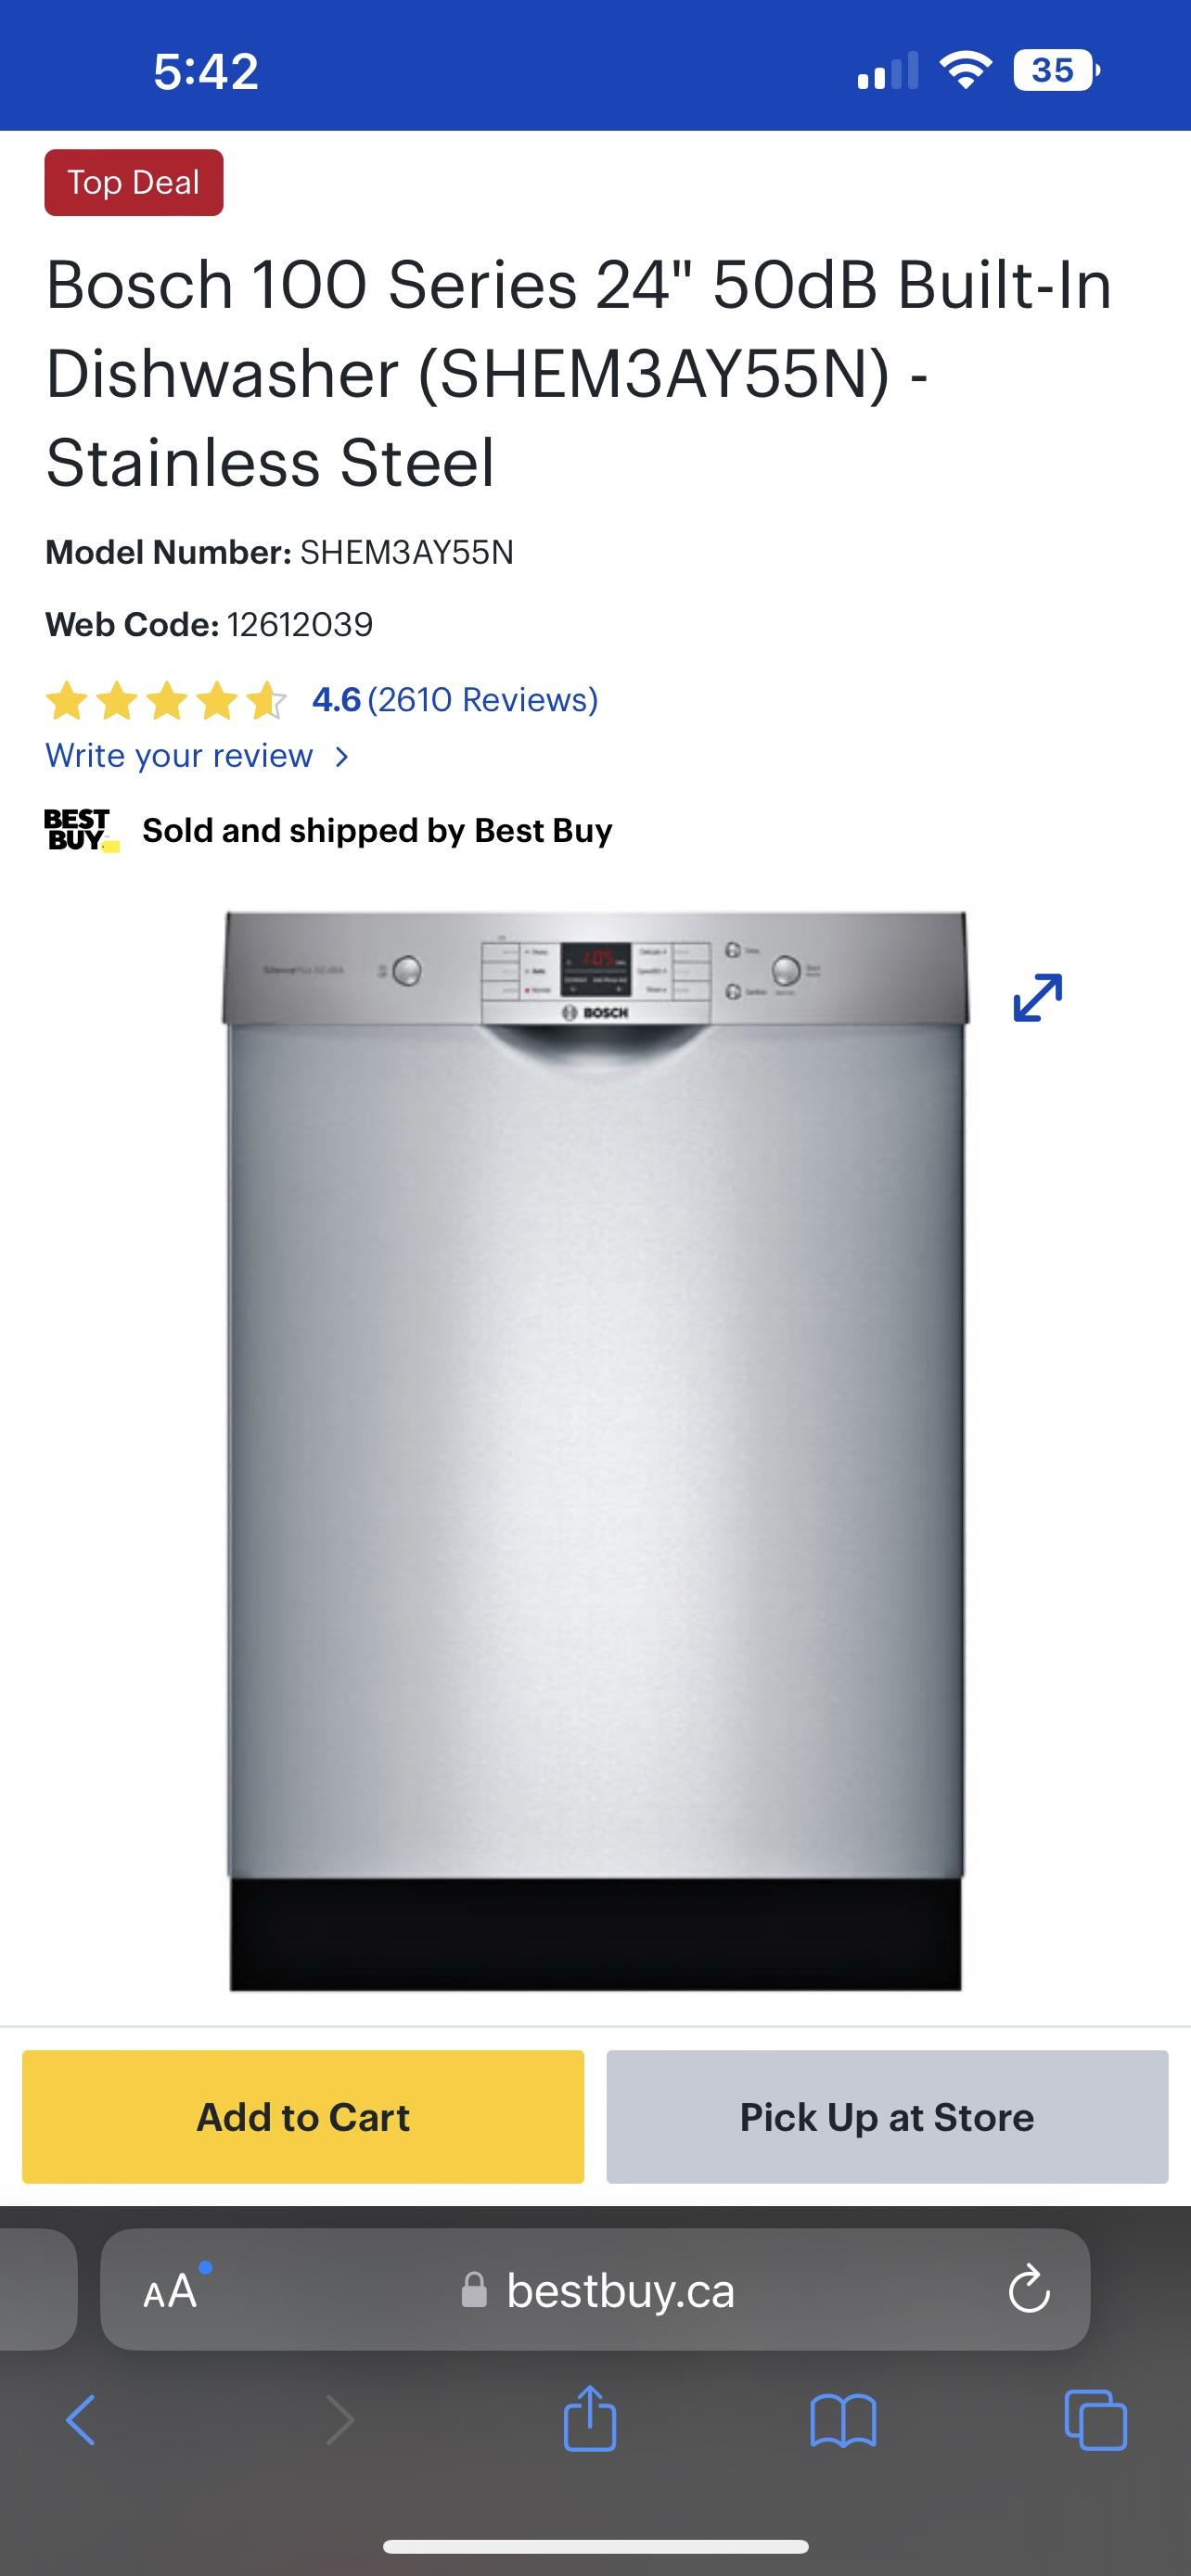 Is this a good dishwasher to purchase?